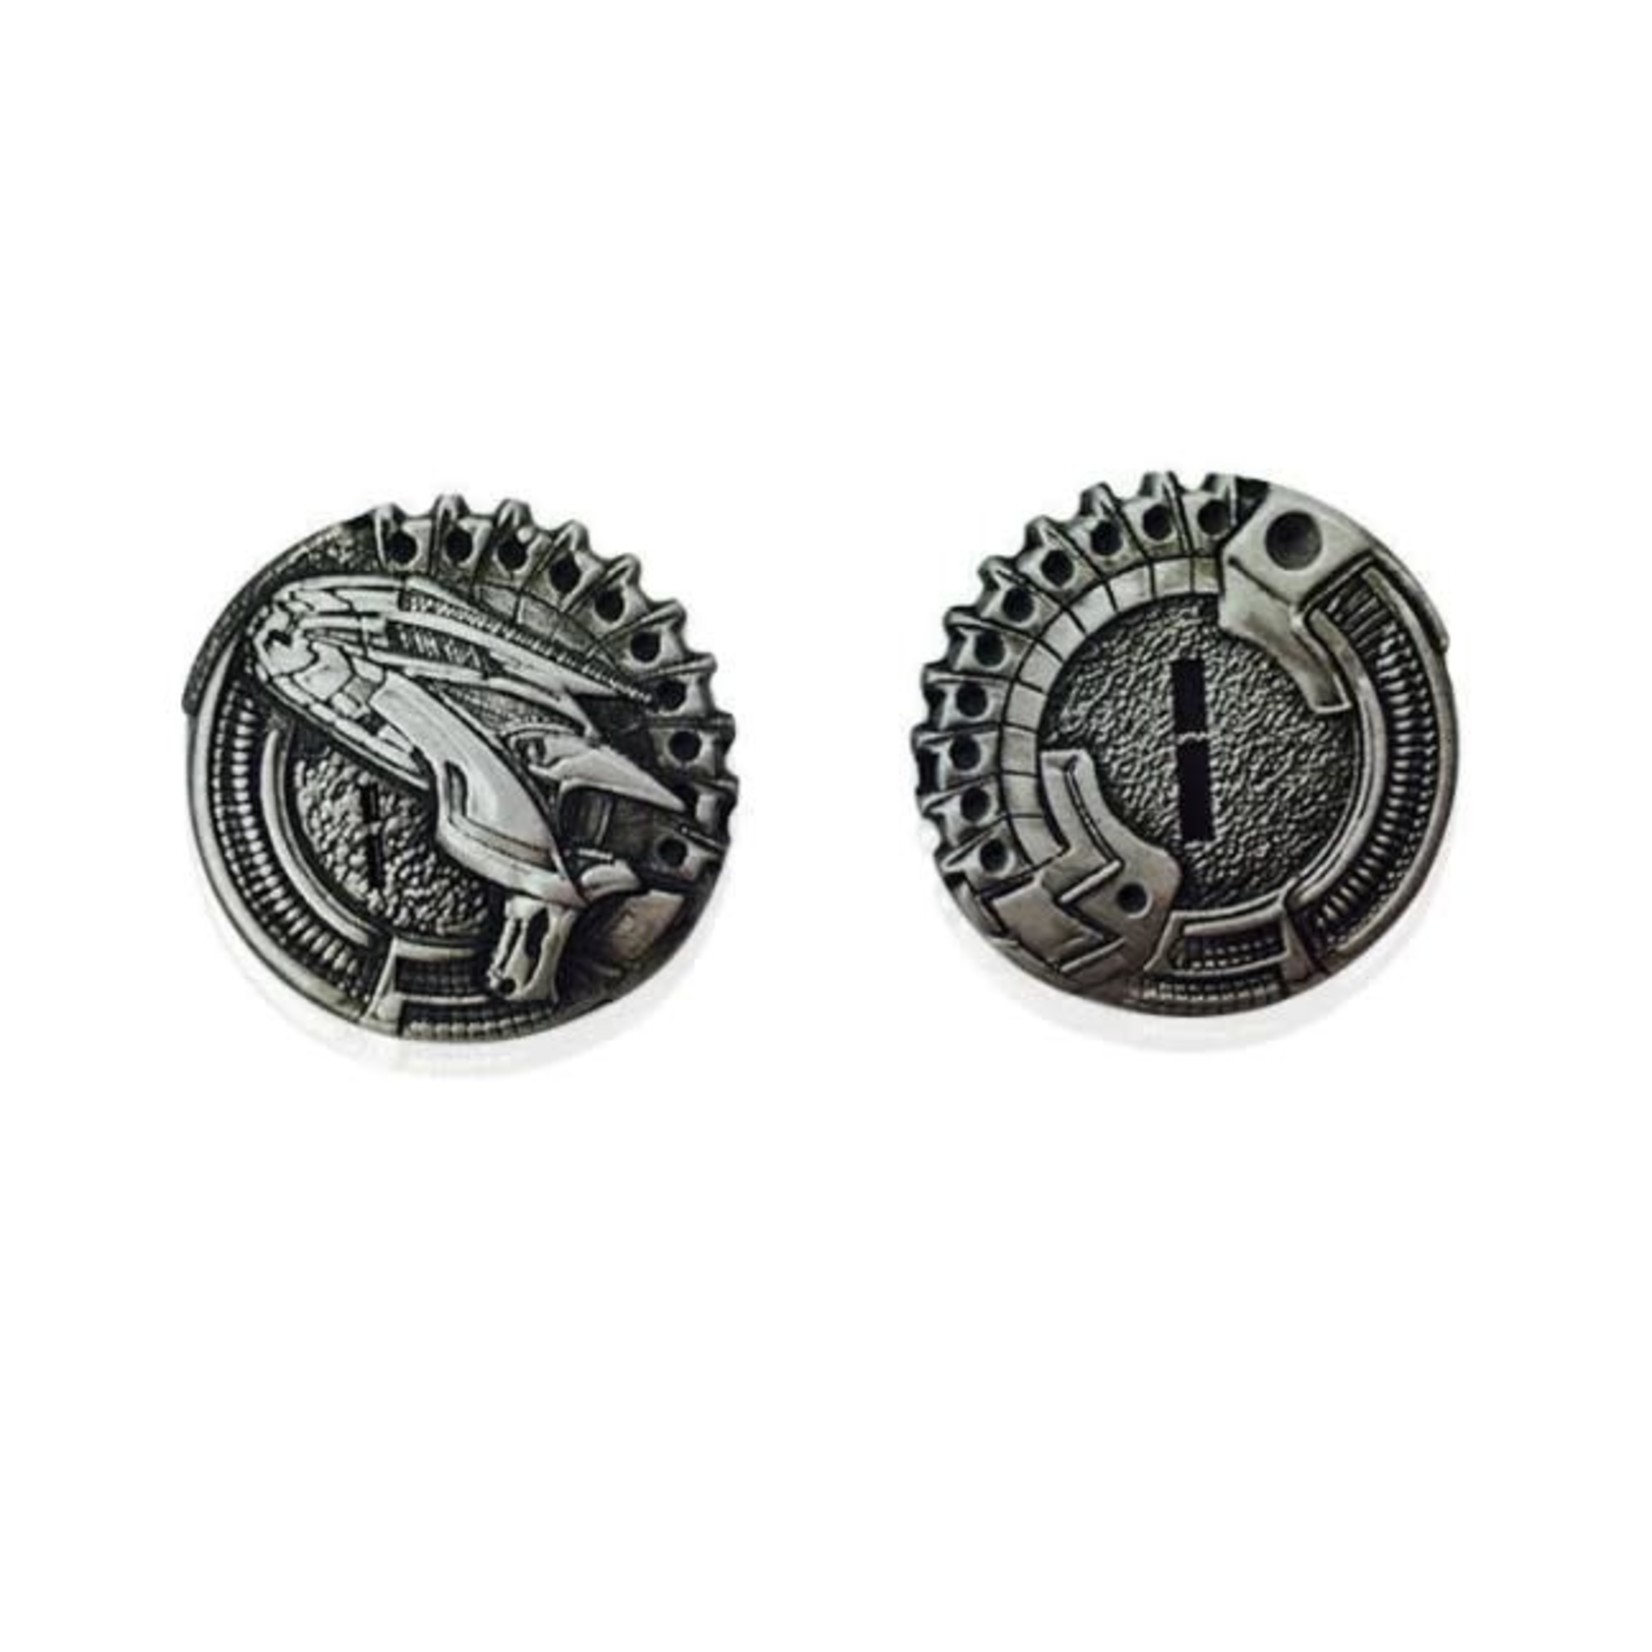 Norse Foundry Adventure Coins: Sci-Fi Star Metal Coins Set of 10